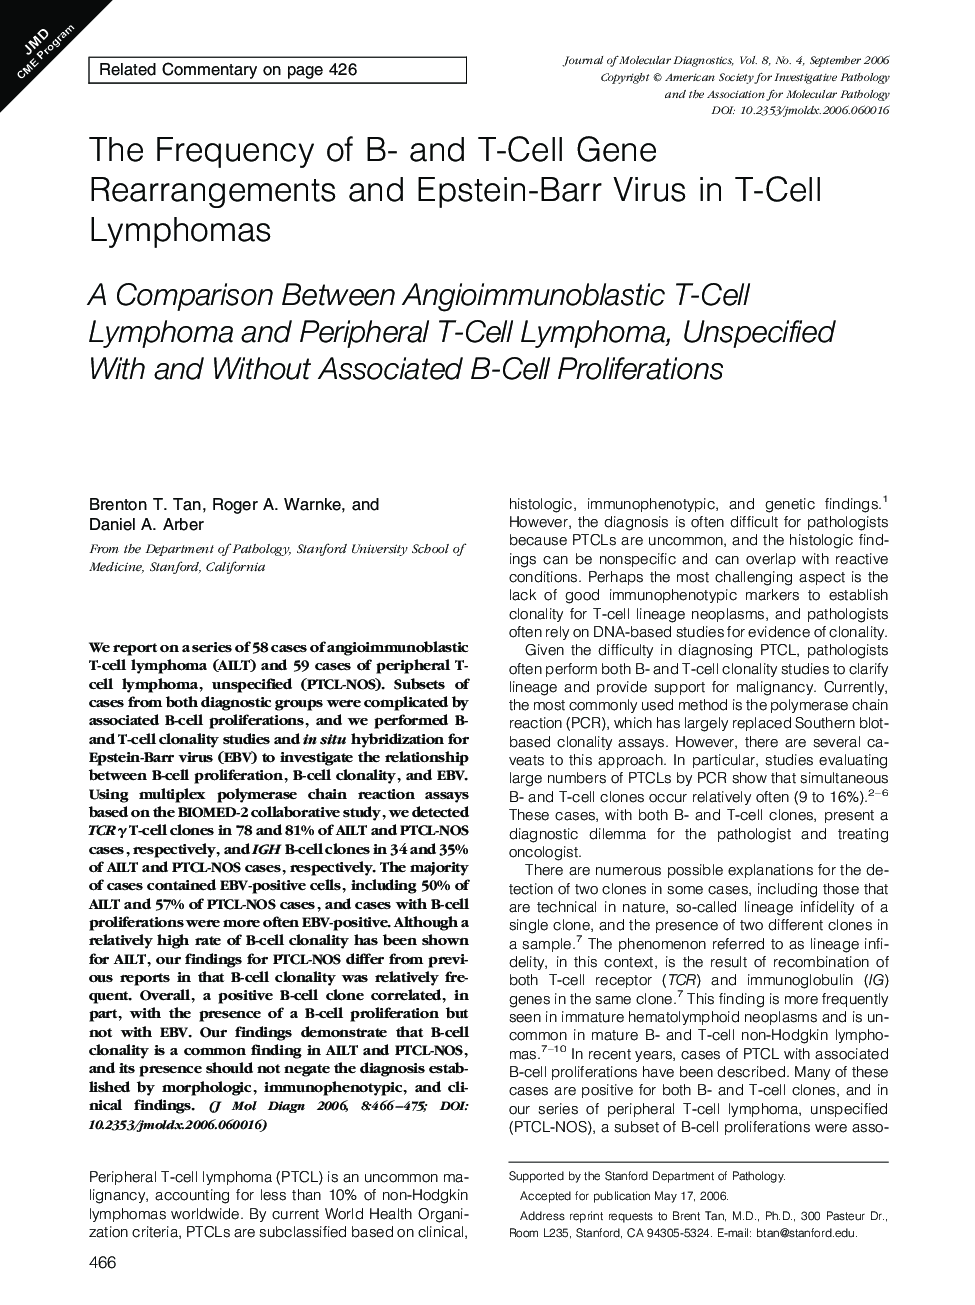 The Frequency of B- and T-Cell Gene Rearrangements and Epstein-Barr Virus in T-Cell Lymphomas : A Comparison Between Angioimmunoblastic T-Cell Lymphoma and Peripheral T-Cell Lymphoma, Unspecified With and Without Associated B-Cell Proliferations